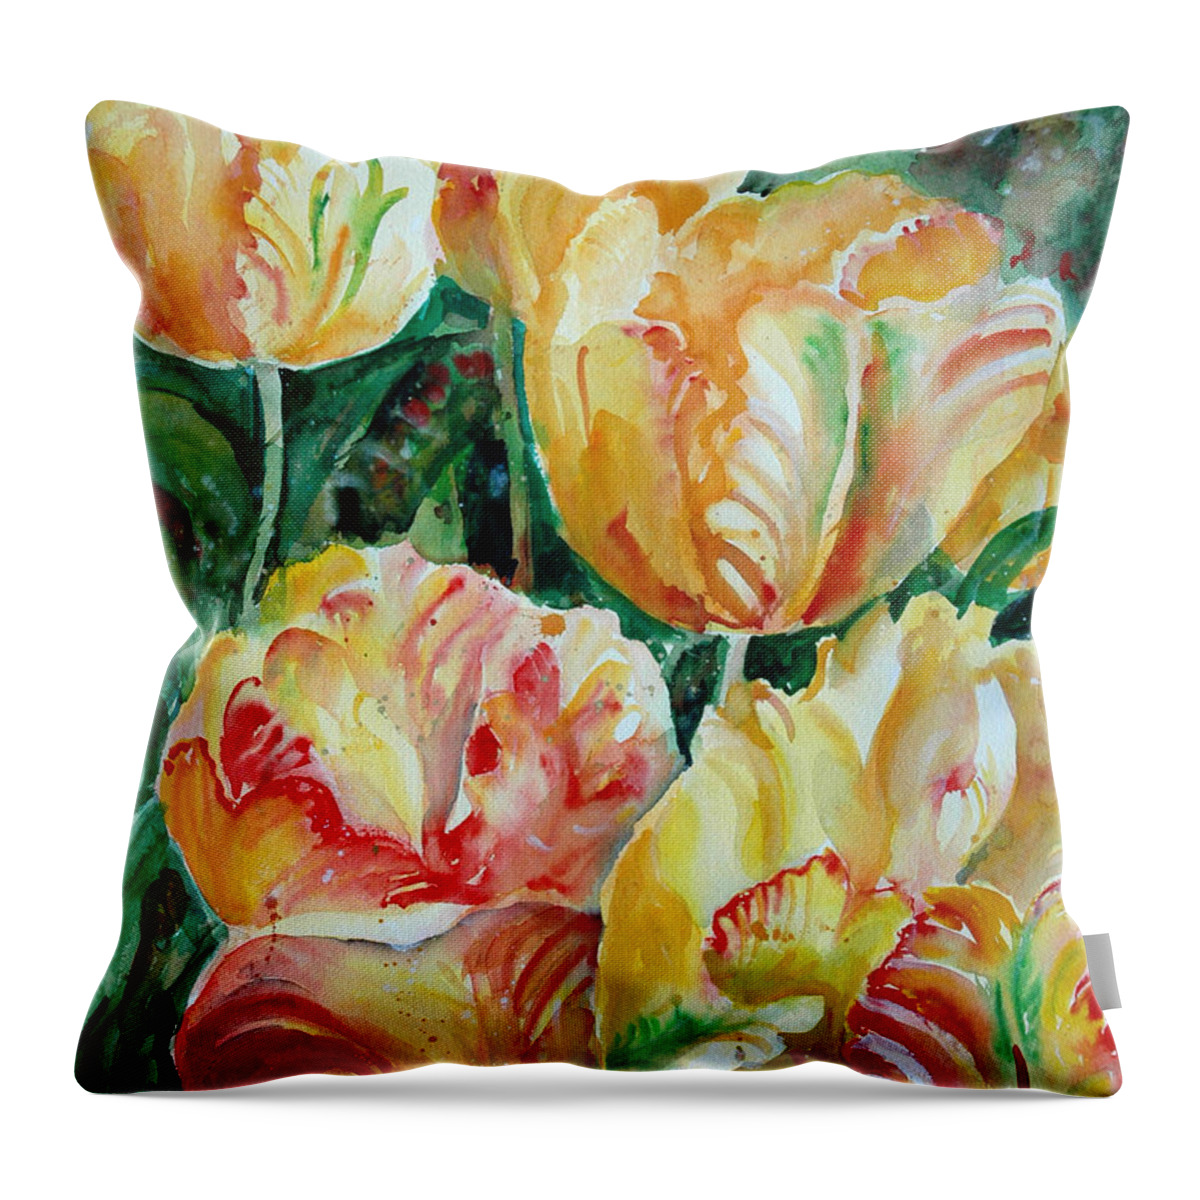 Paper Throw Pillow featuring the painting Tulips by Ingrid Dohm